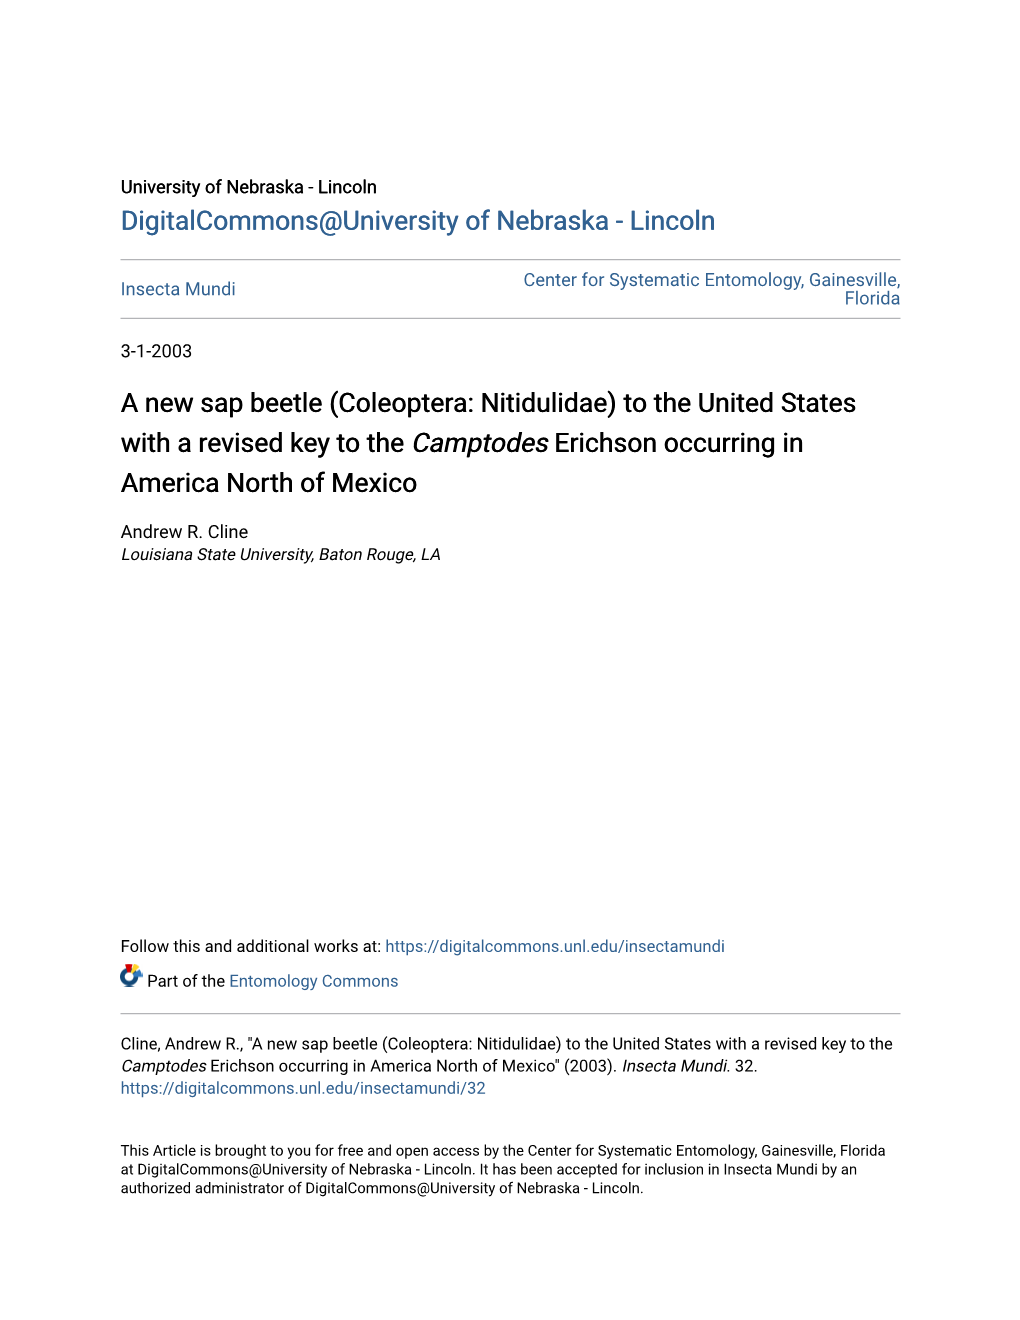 A New Sap Beetle (Coleoptera: Nitidulidae) to the United States with a Revised Key to the Camptodes Erichson Occurring in America North of Mexico